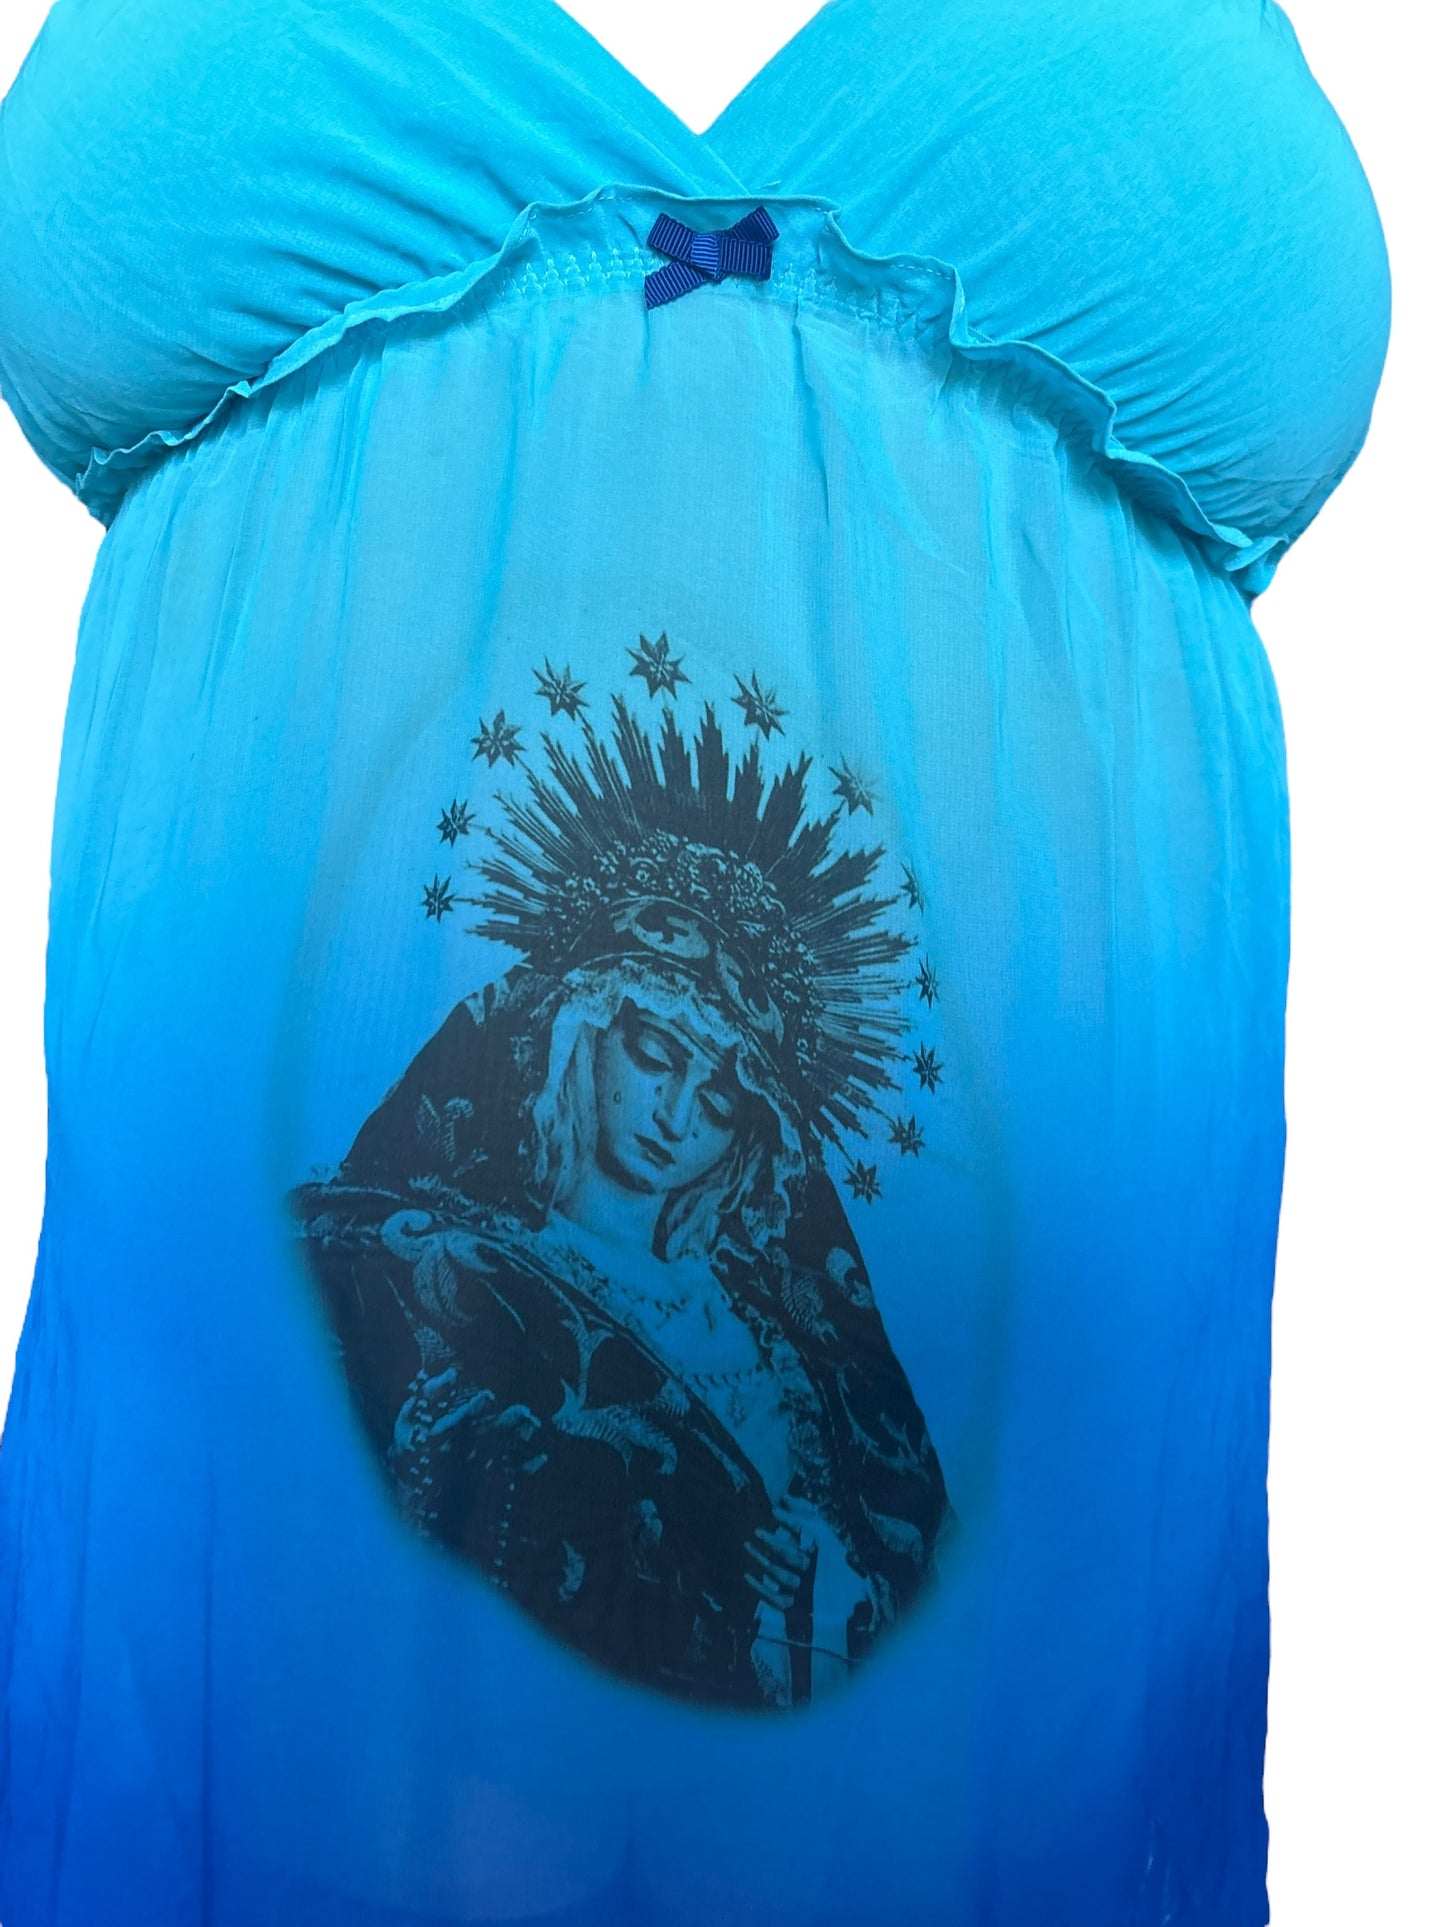 Mary Blue Ombre Dress - 2X/3X